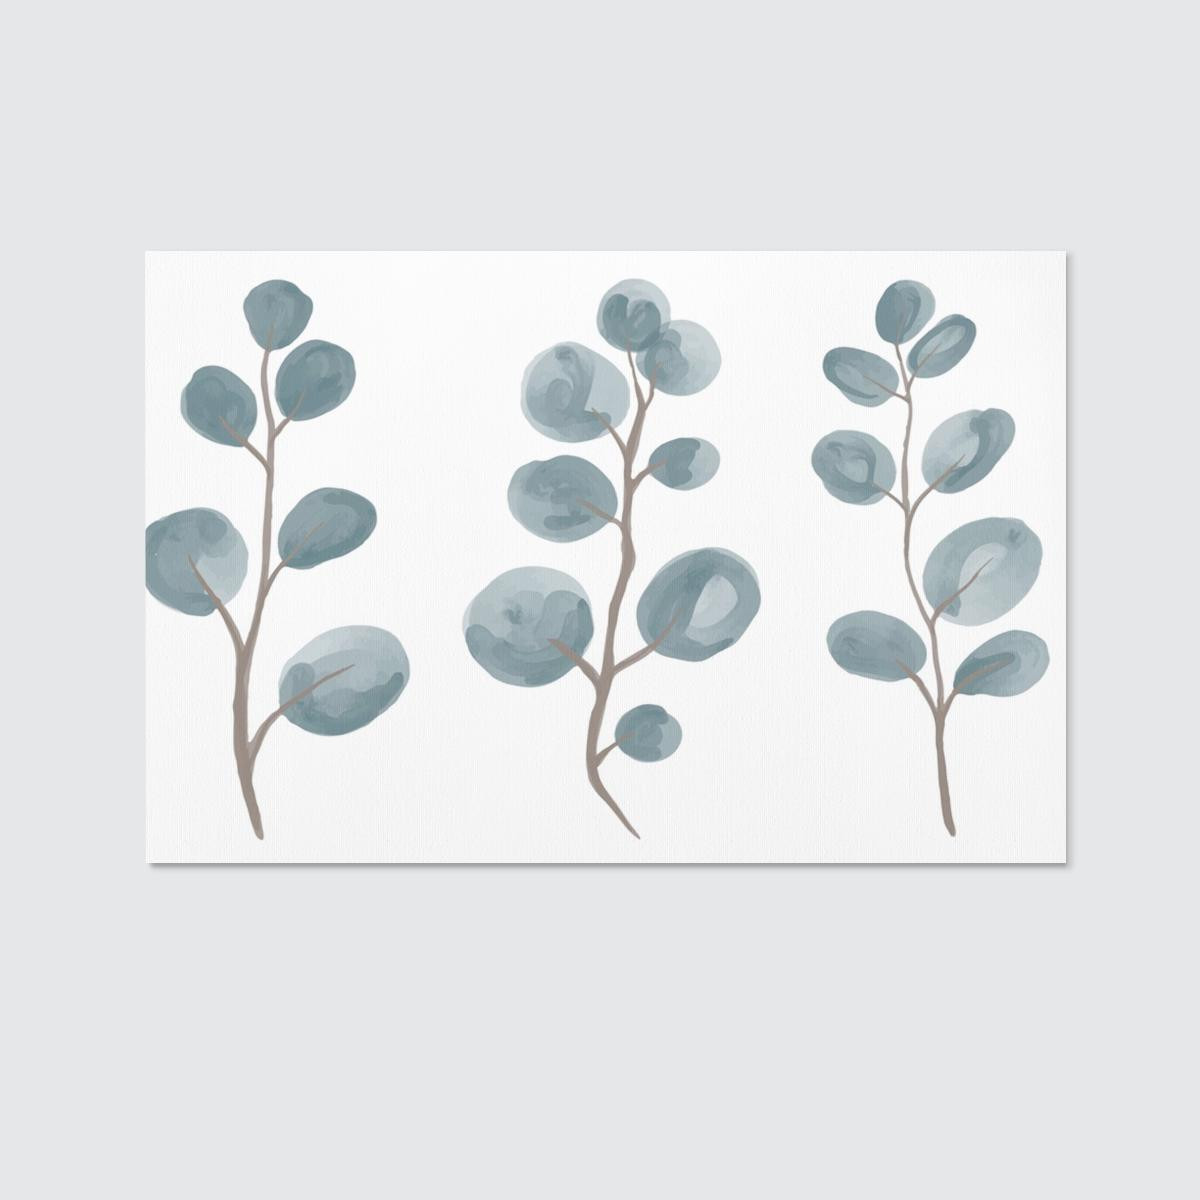 A Set Of Watercolor Twigs Of Round-Leaved Silver Eucalyptus Canvas